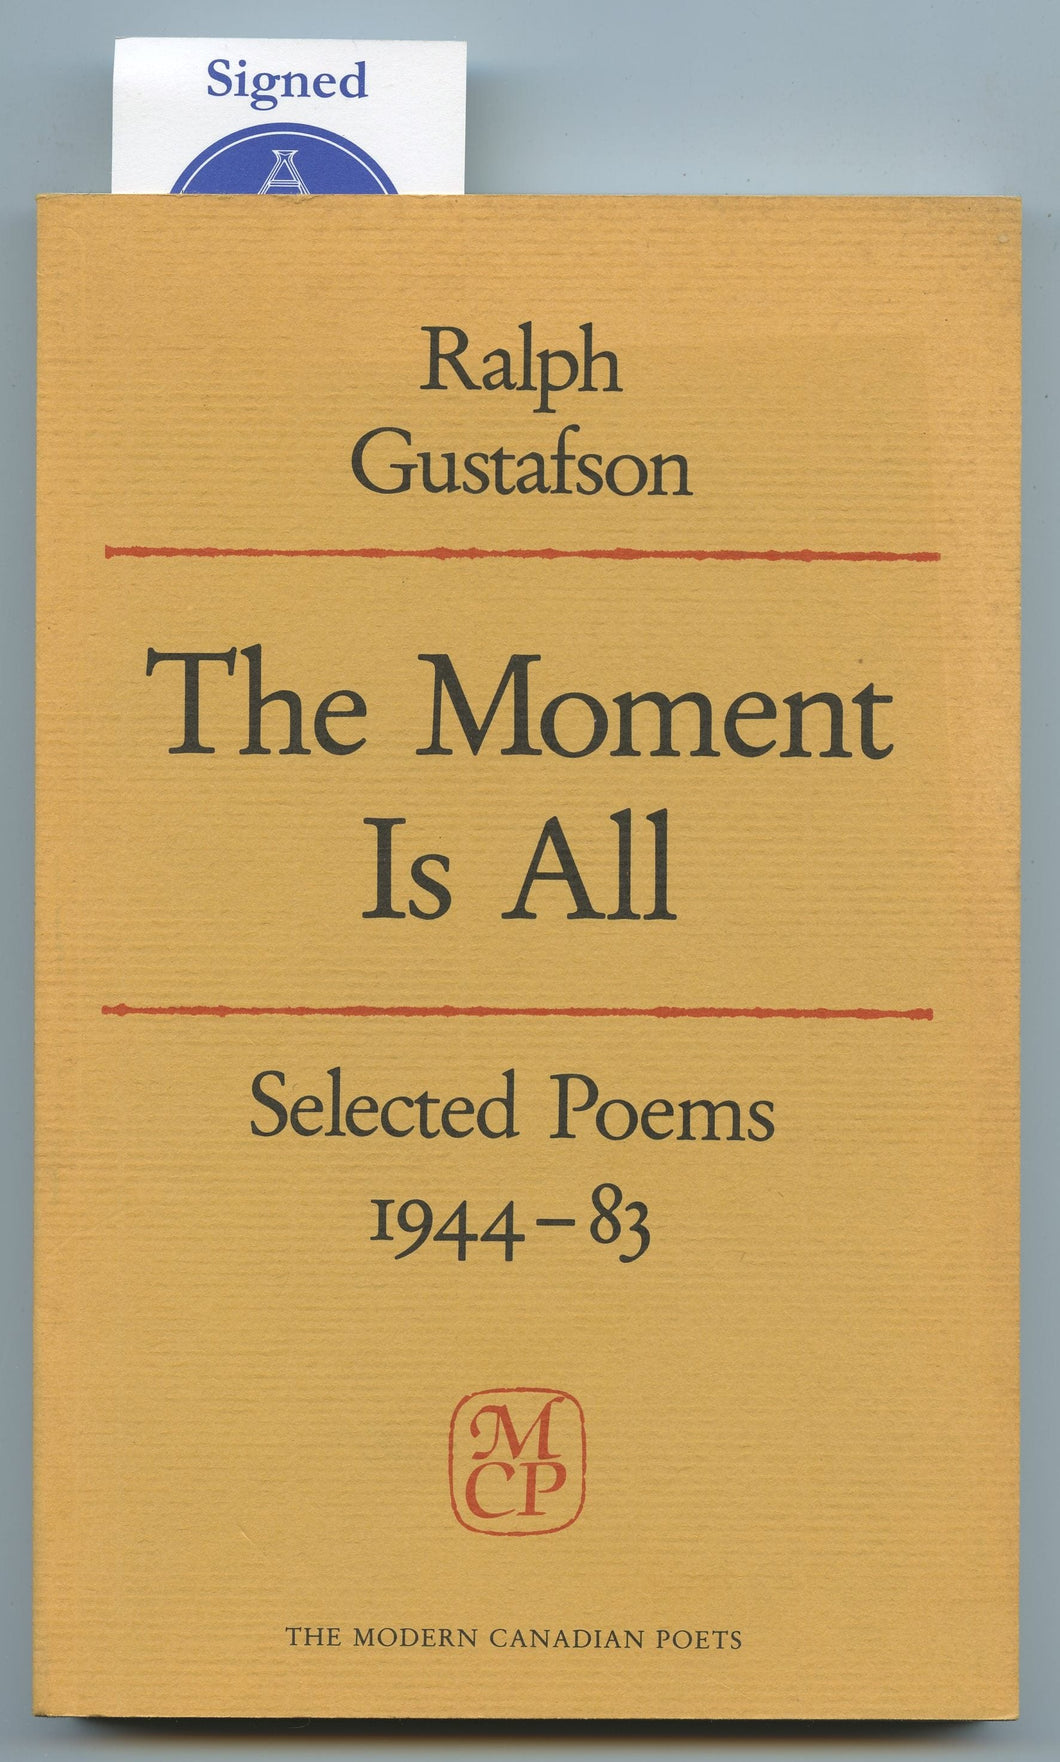 The Moment Is All: Selected Poems 1944-83